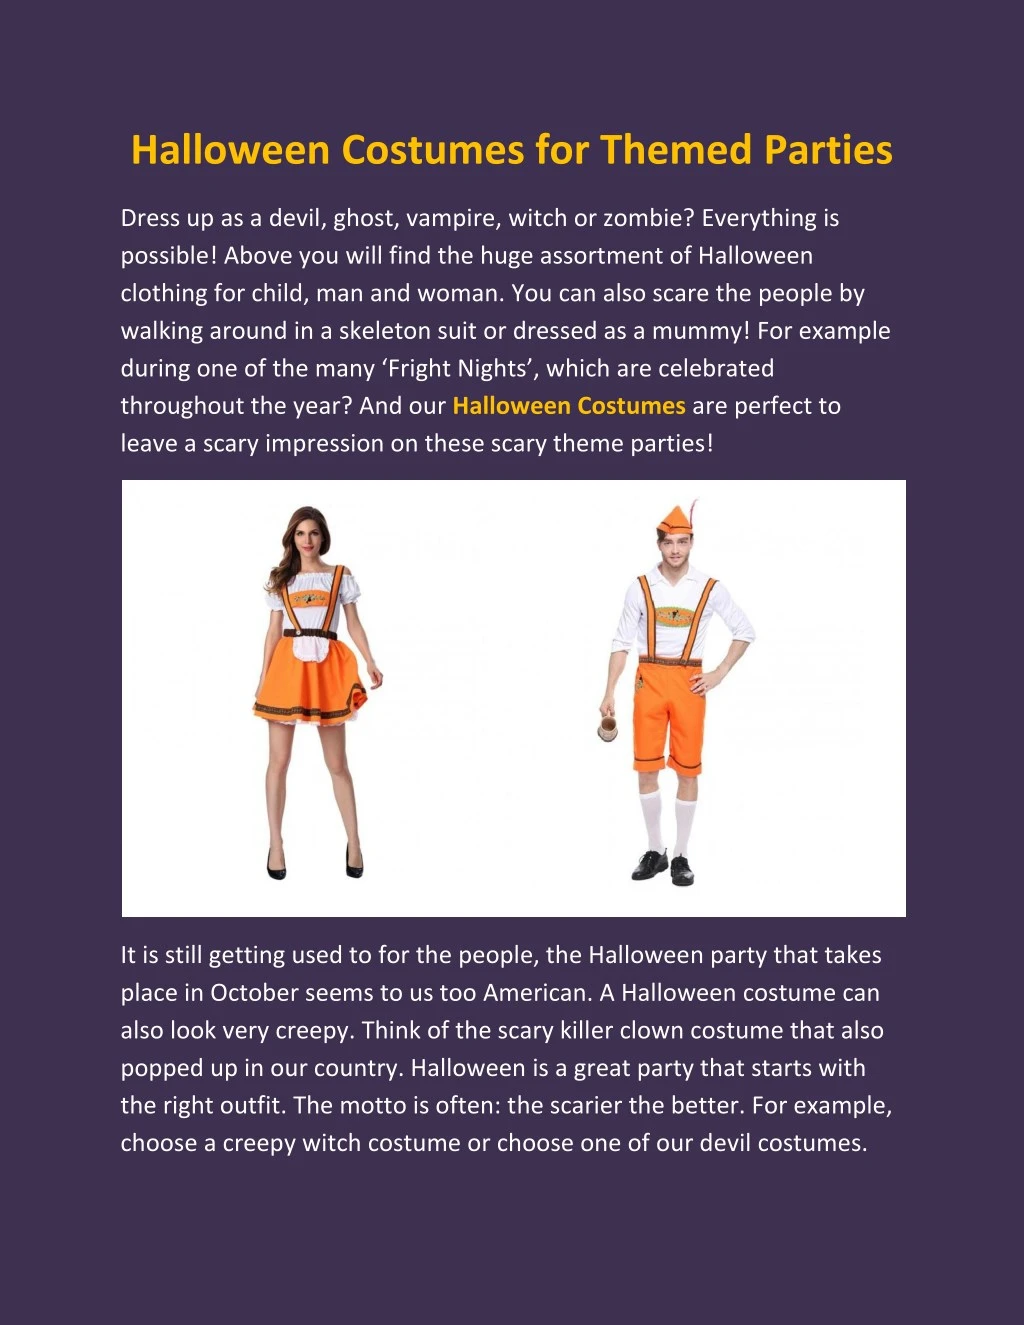 halloween costumes for themed parties